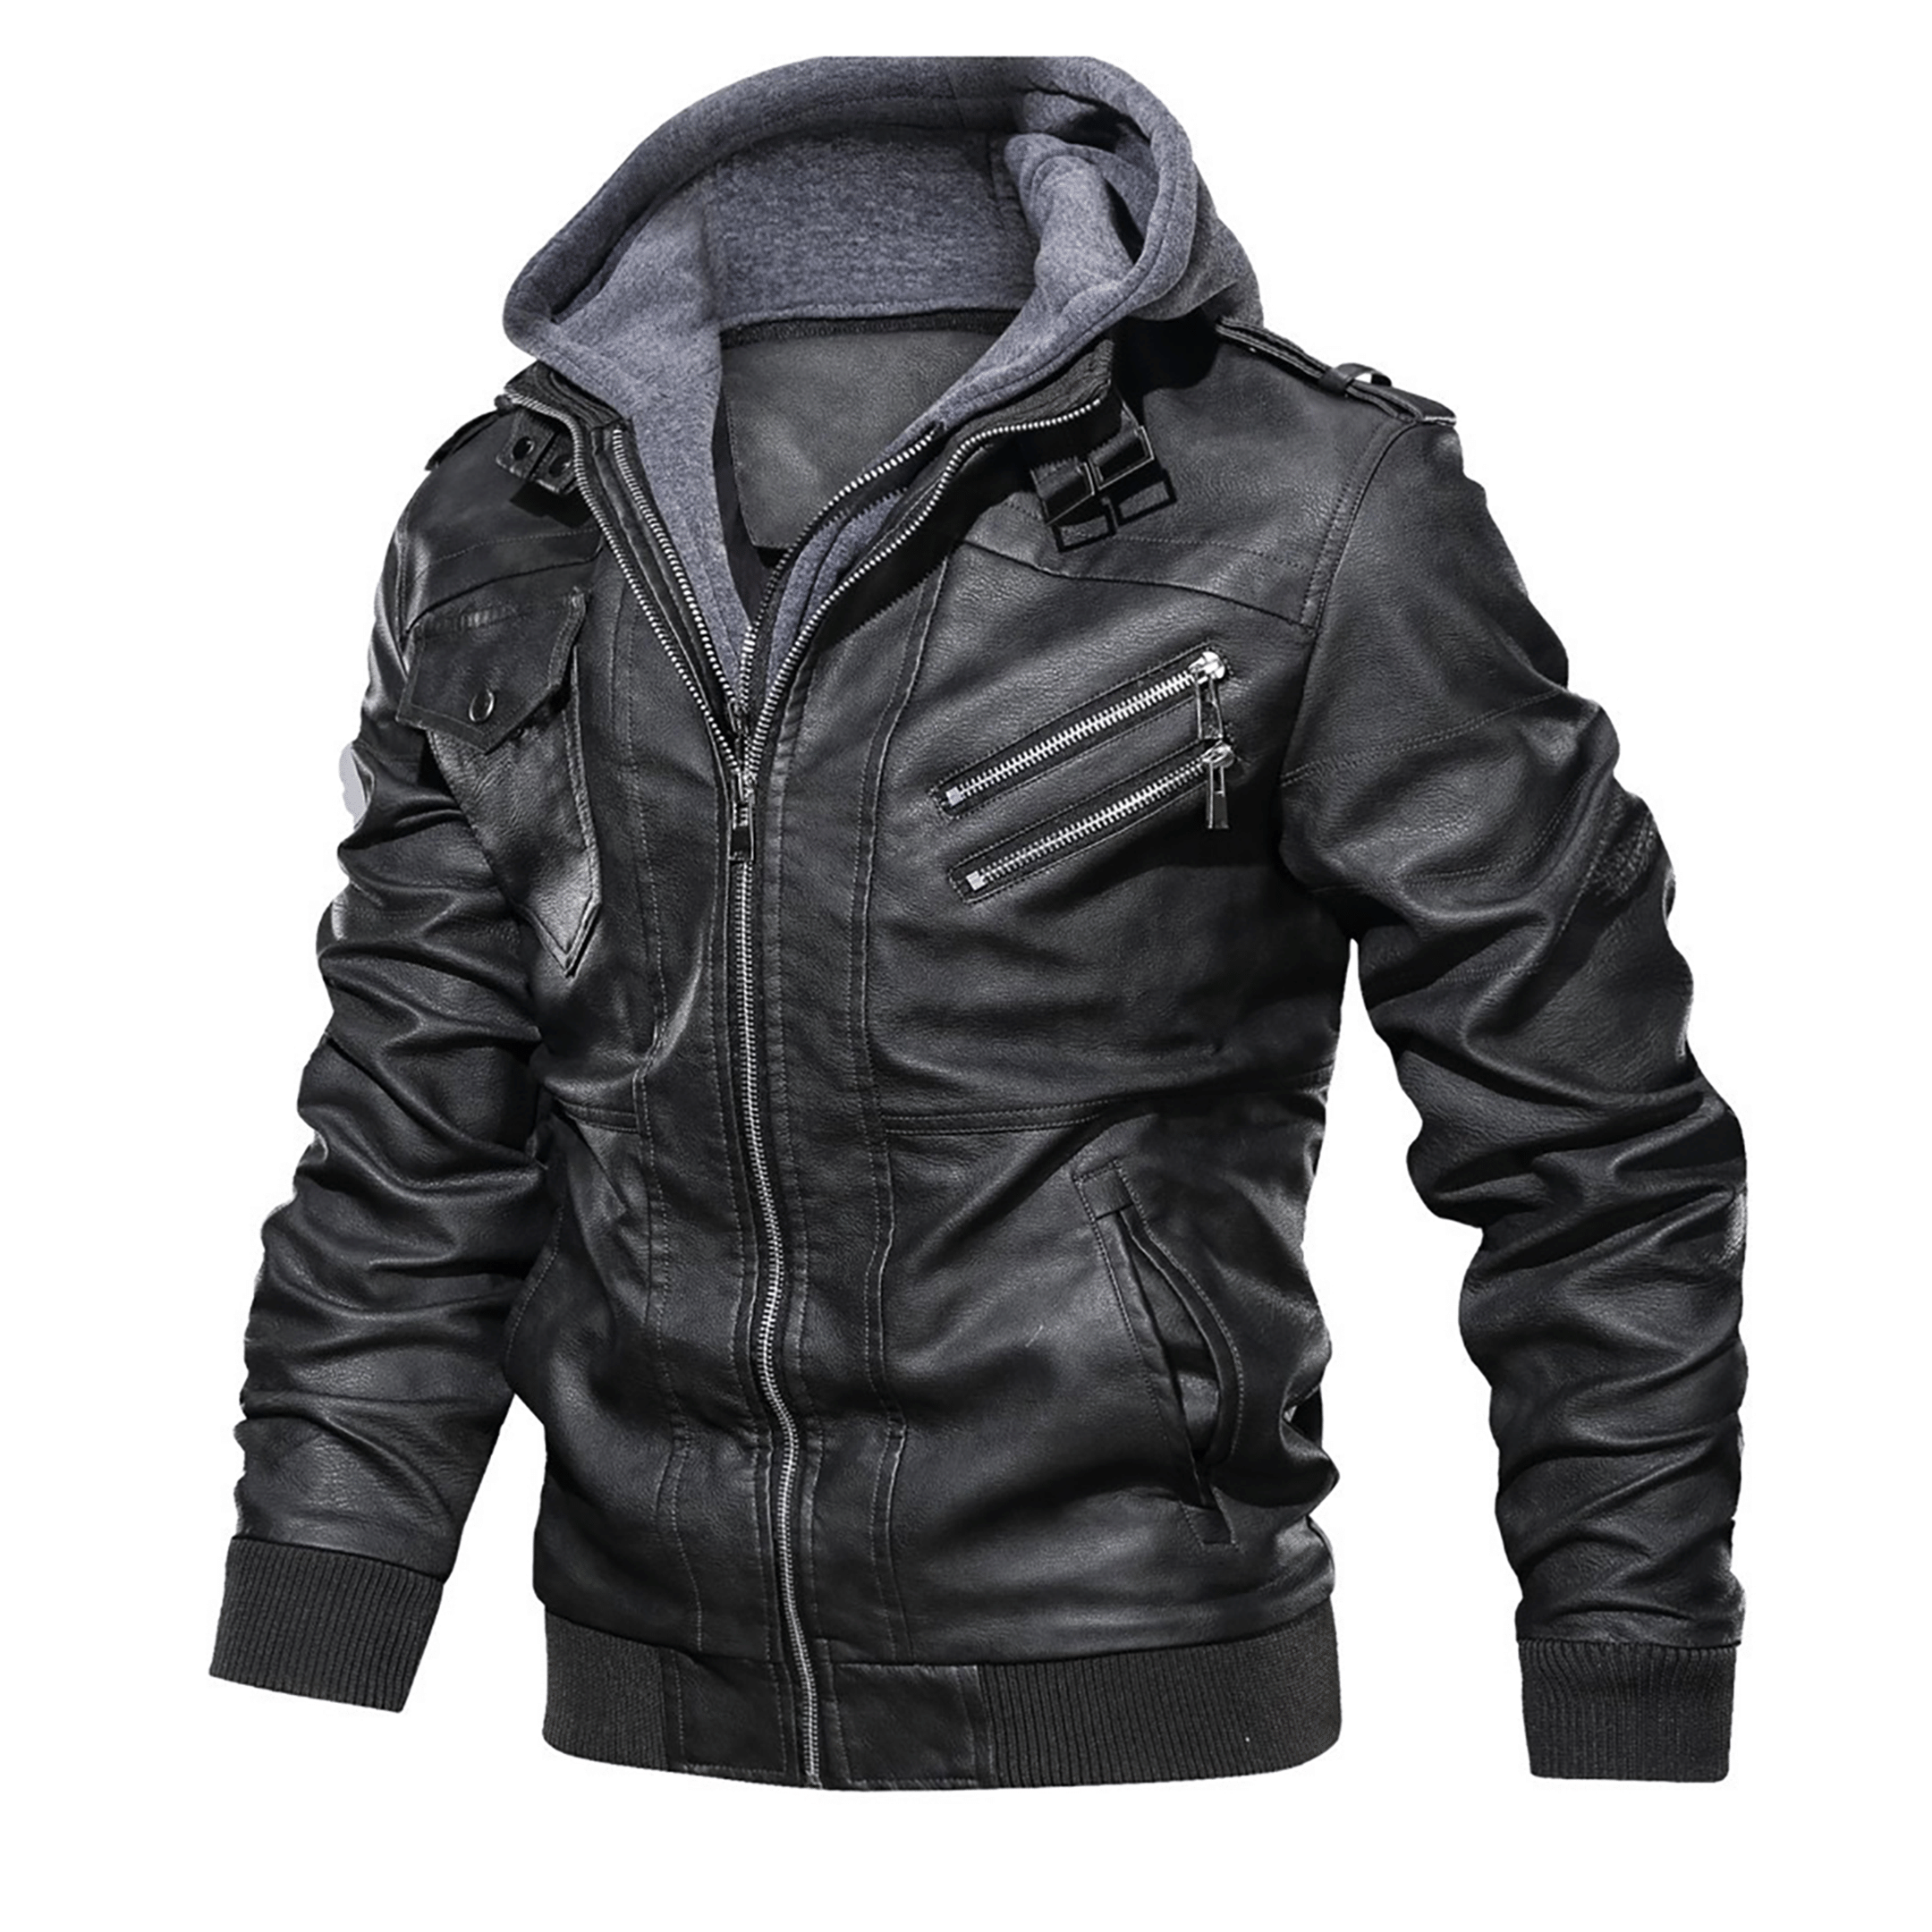 Top leather jackets and latest products 141